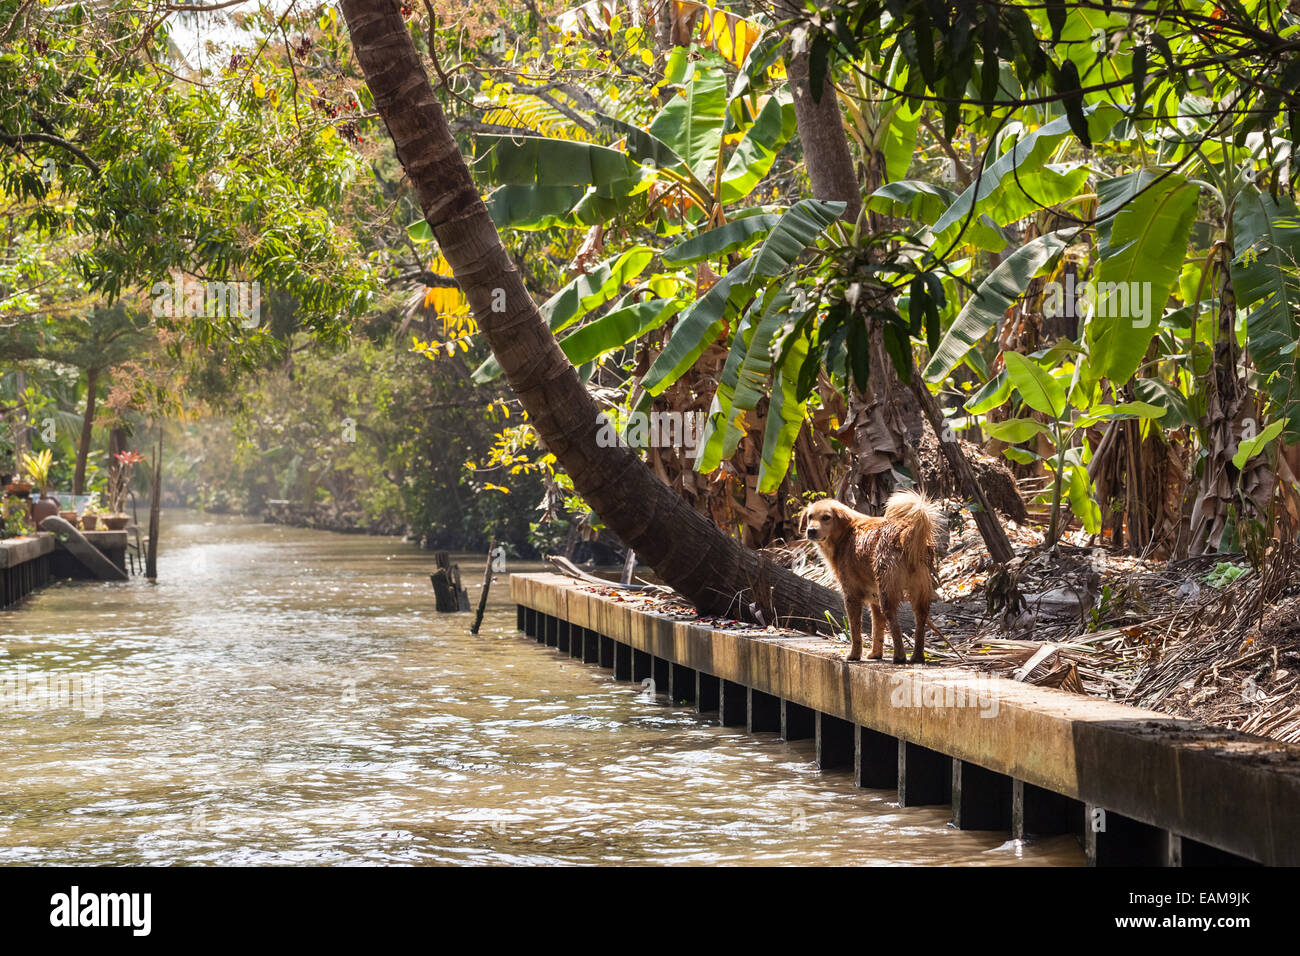 A lovable stray dog walking on the side of a water canal in the thai countryside Stock Photo